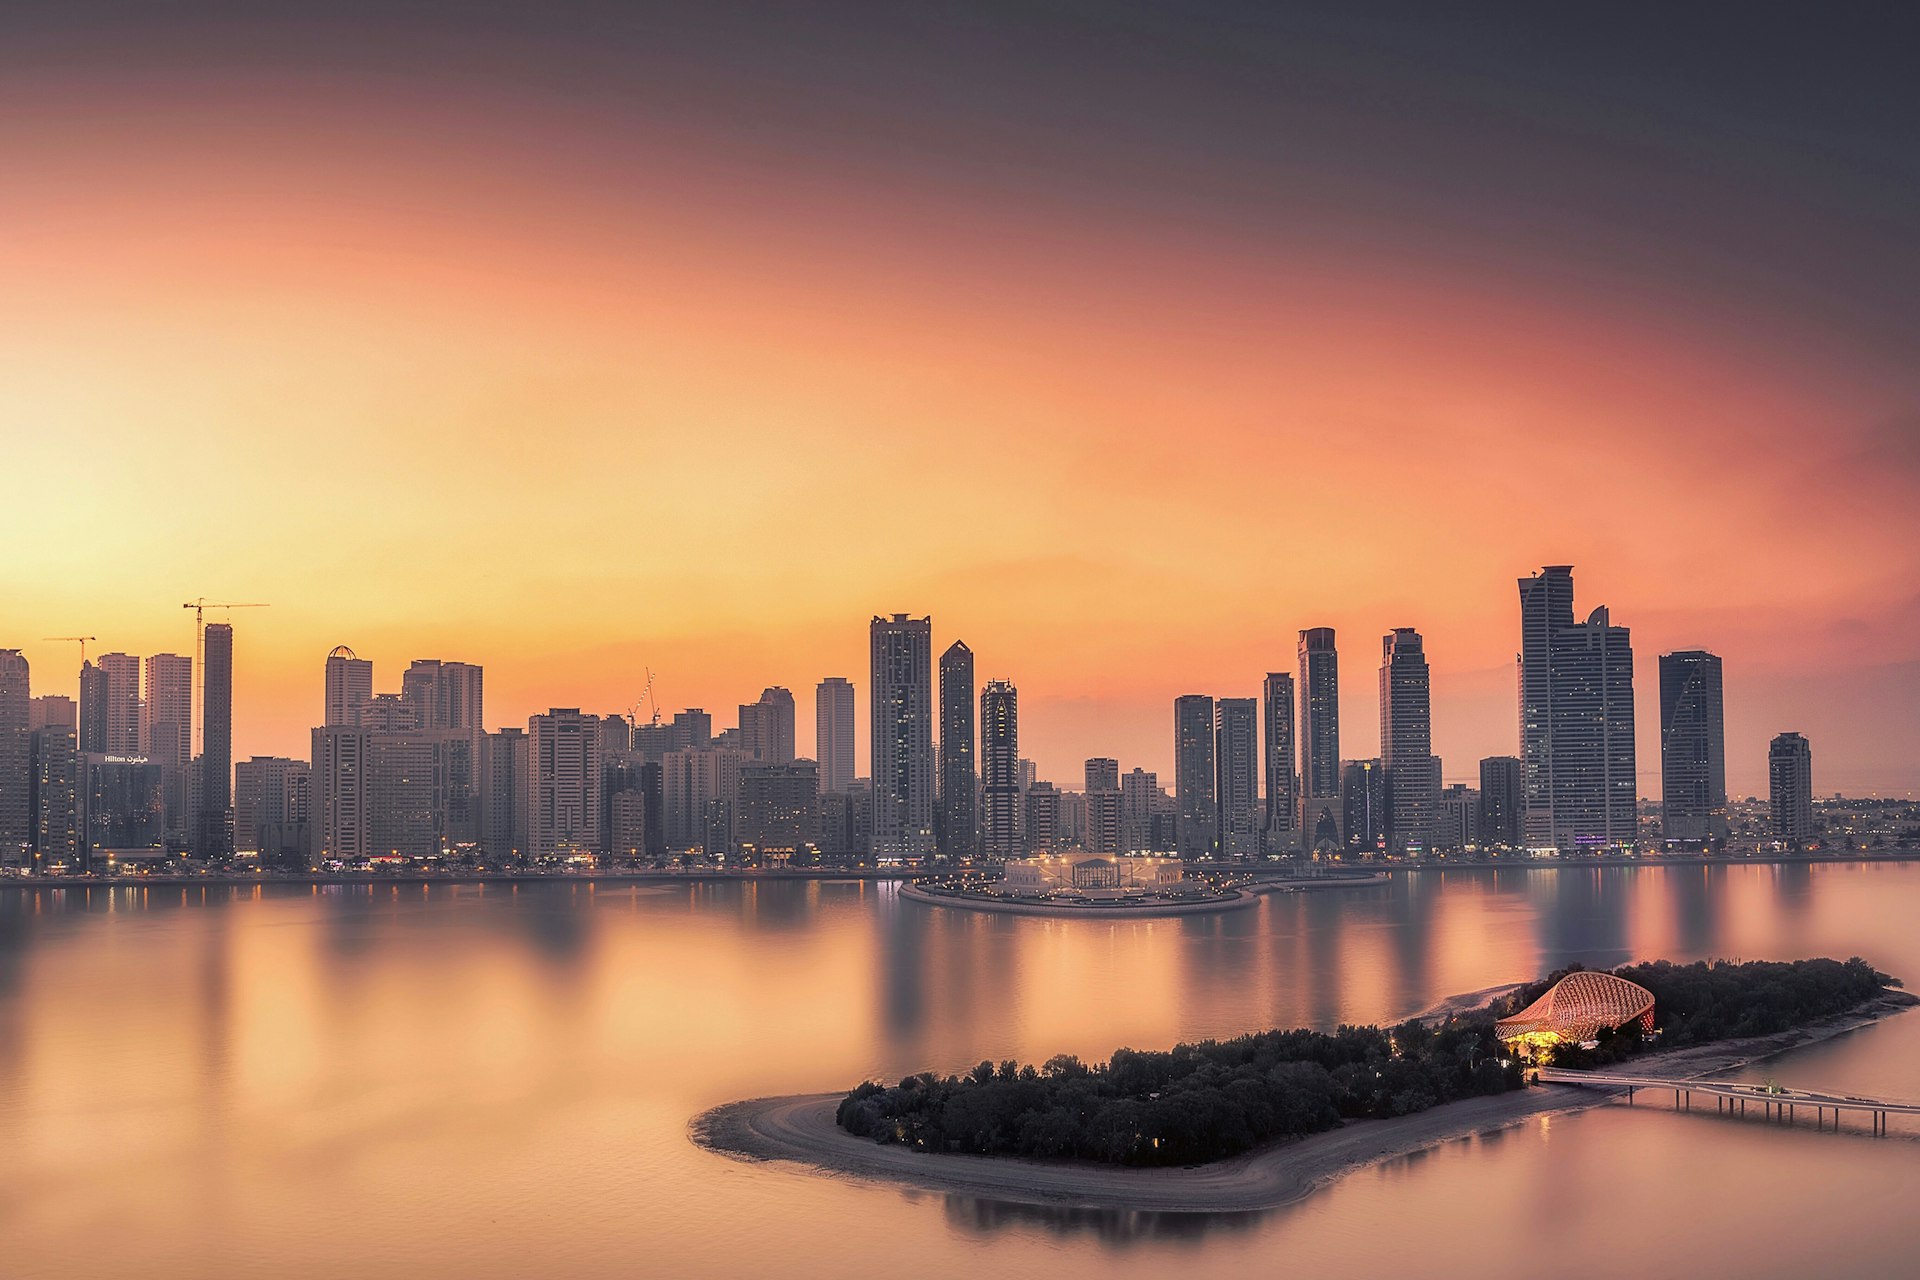 The skyline of Sharjah, comprising numerous skyscrapers, juts up into a bright orange sky at sunset; in the foreground is the forest-covered island of Al Noor, which has some dazzling architecture at its centre.